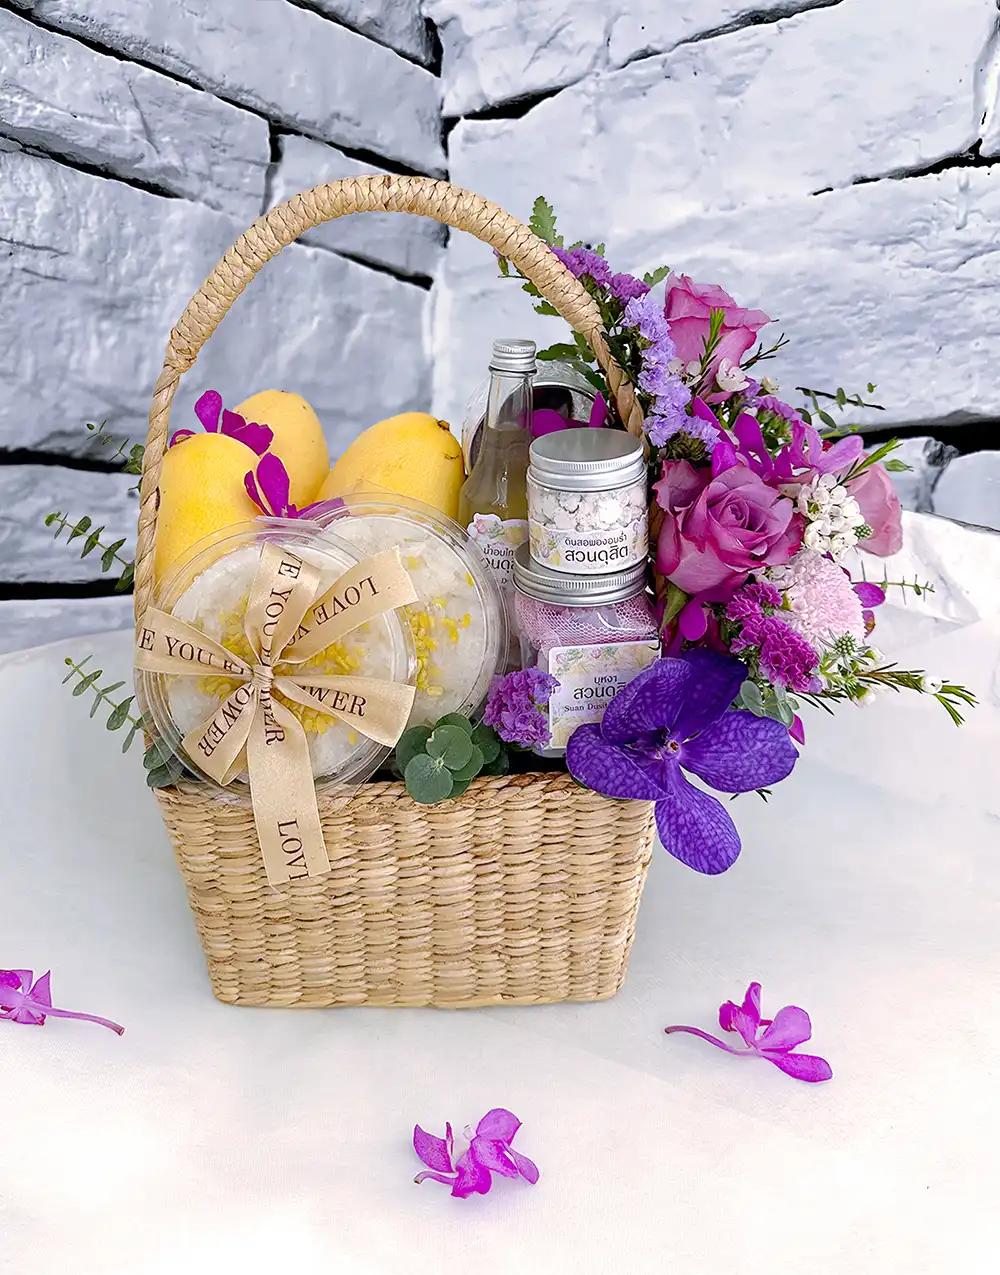 Songkran gift basket BFS007 with mango sticky rice and cooling Thai aroma set, adorned with purple flowers.